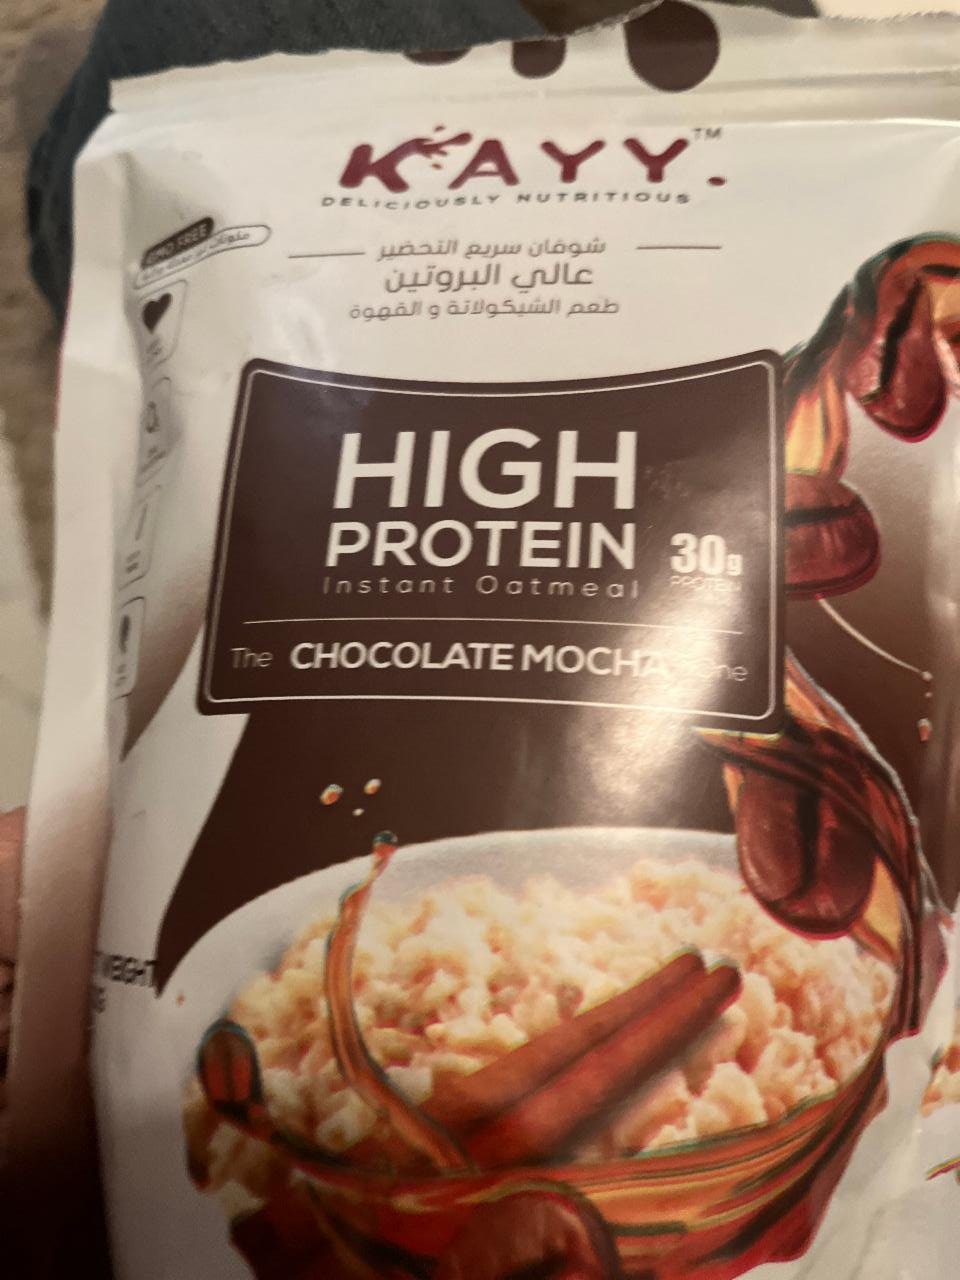 Fotografie - High protein Instant oatmeal The chocolate mocha Kayy